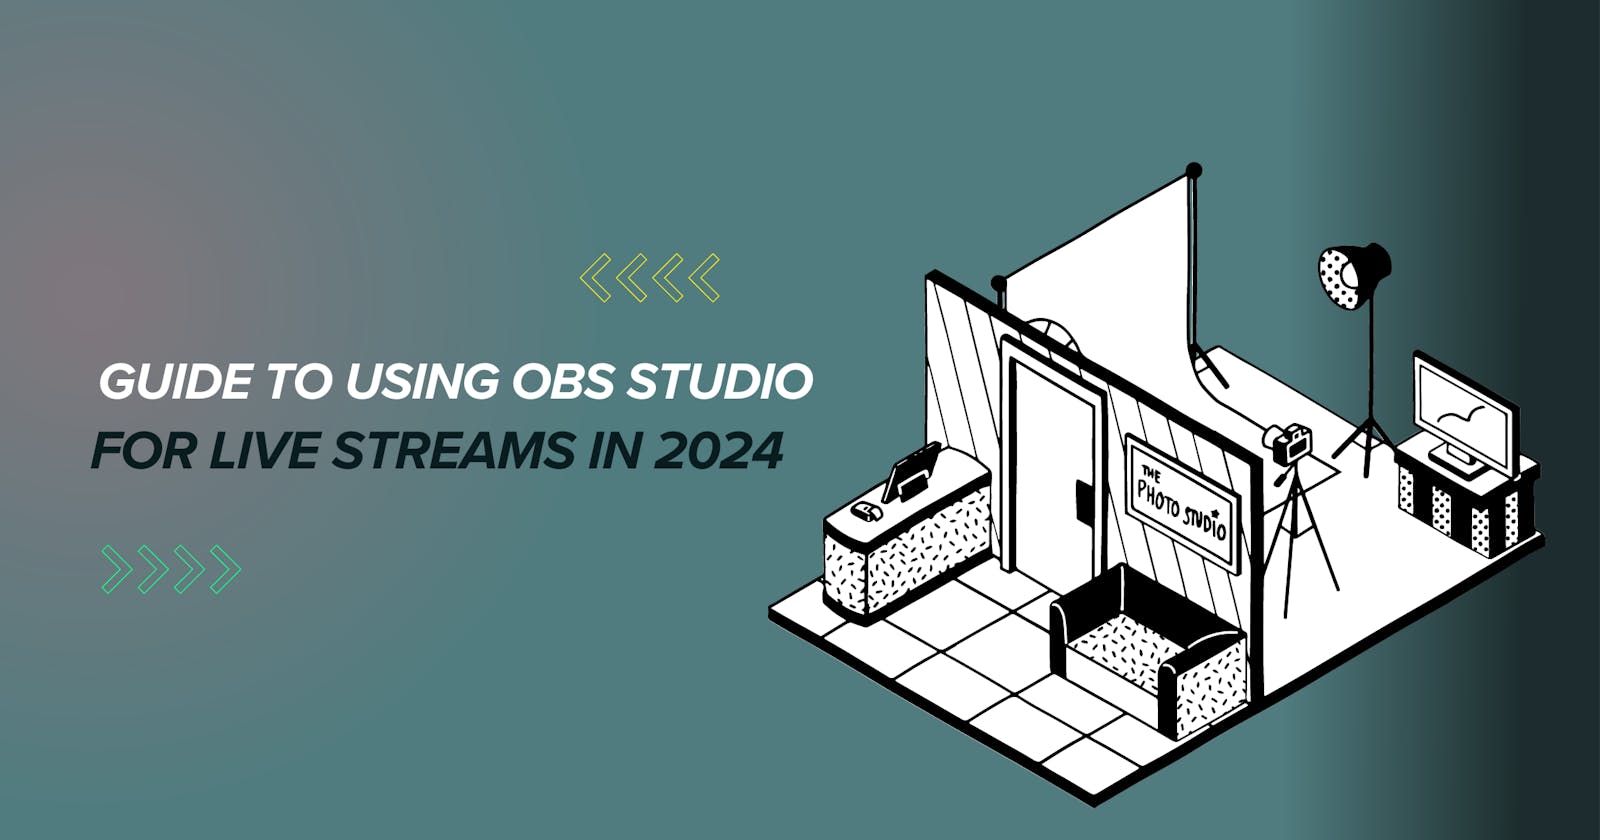 Guide to Using OBS Studio for Live Streams in 2024